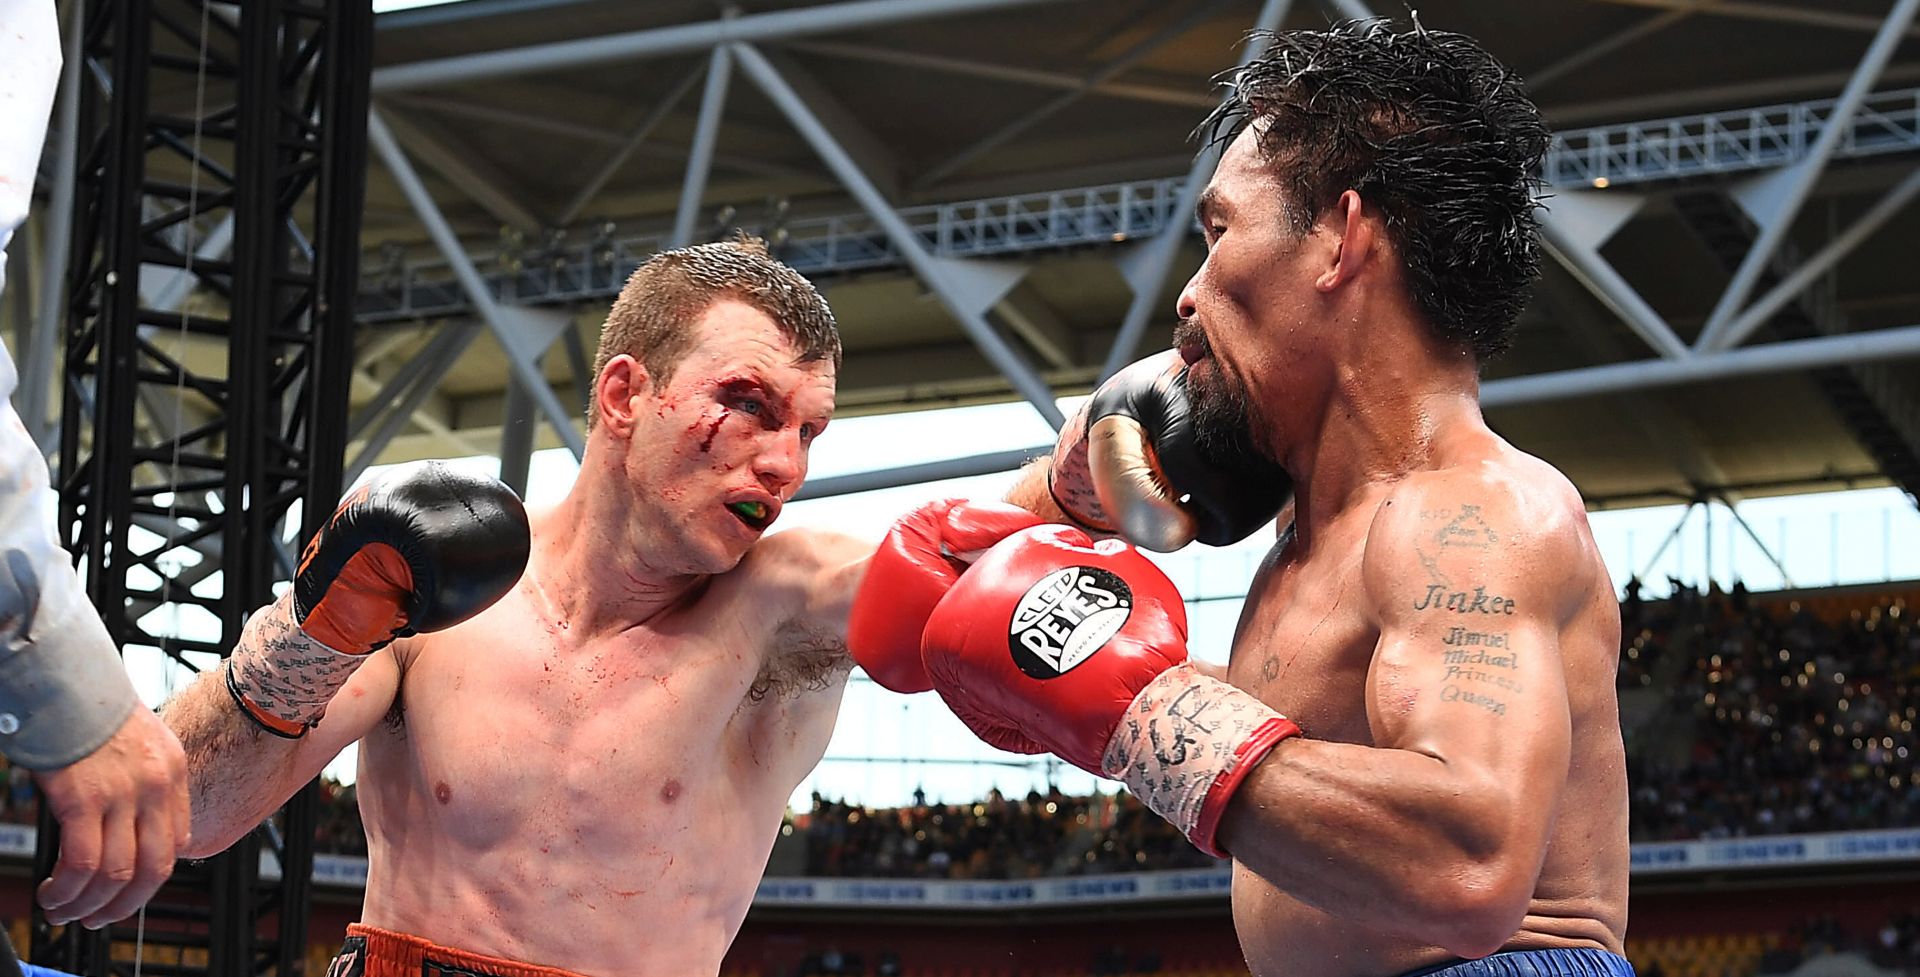 epa06061029 Jeff Horn (L) of Australia punches current title holder Manny Pacquiao (R) of the Philippines during their WBO World Welterweight title boxing match at Suncorp Stadium in Brisbane, Queensland, Australia, 02 July 2017.  EPA/DAVE HUNT   EDITORIAL USE ONLY